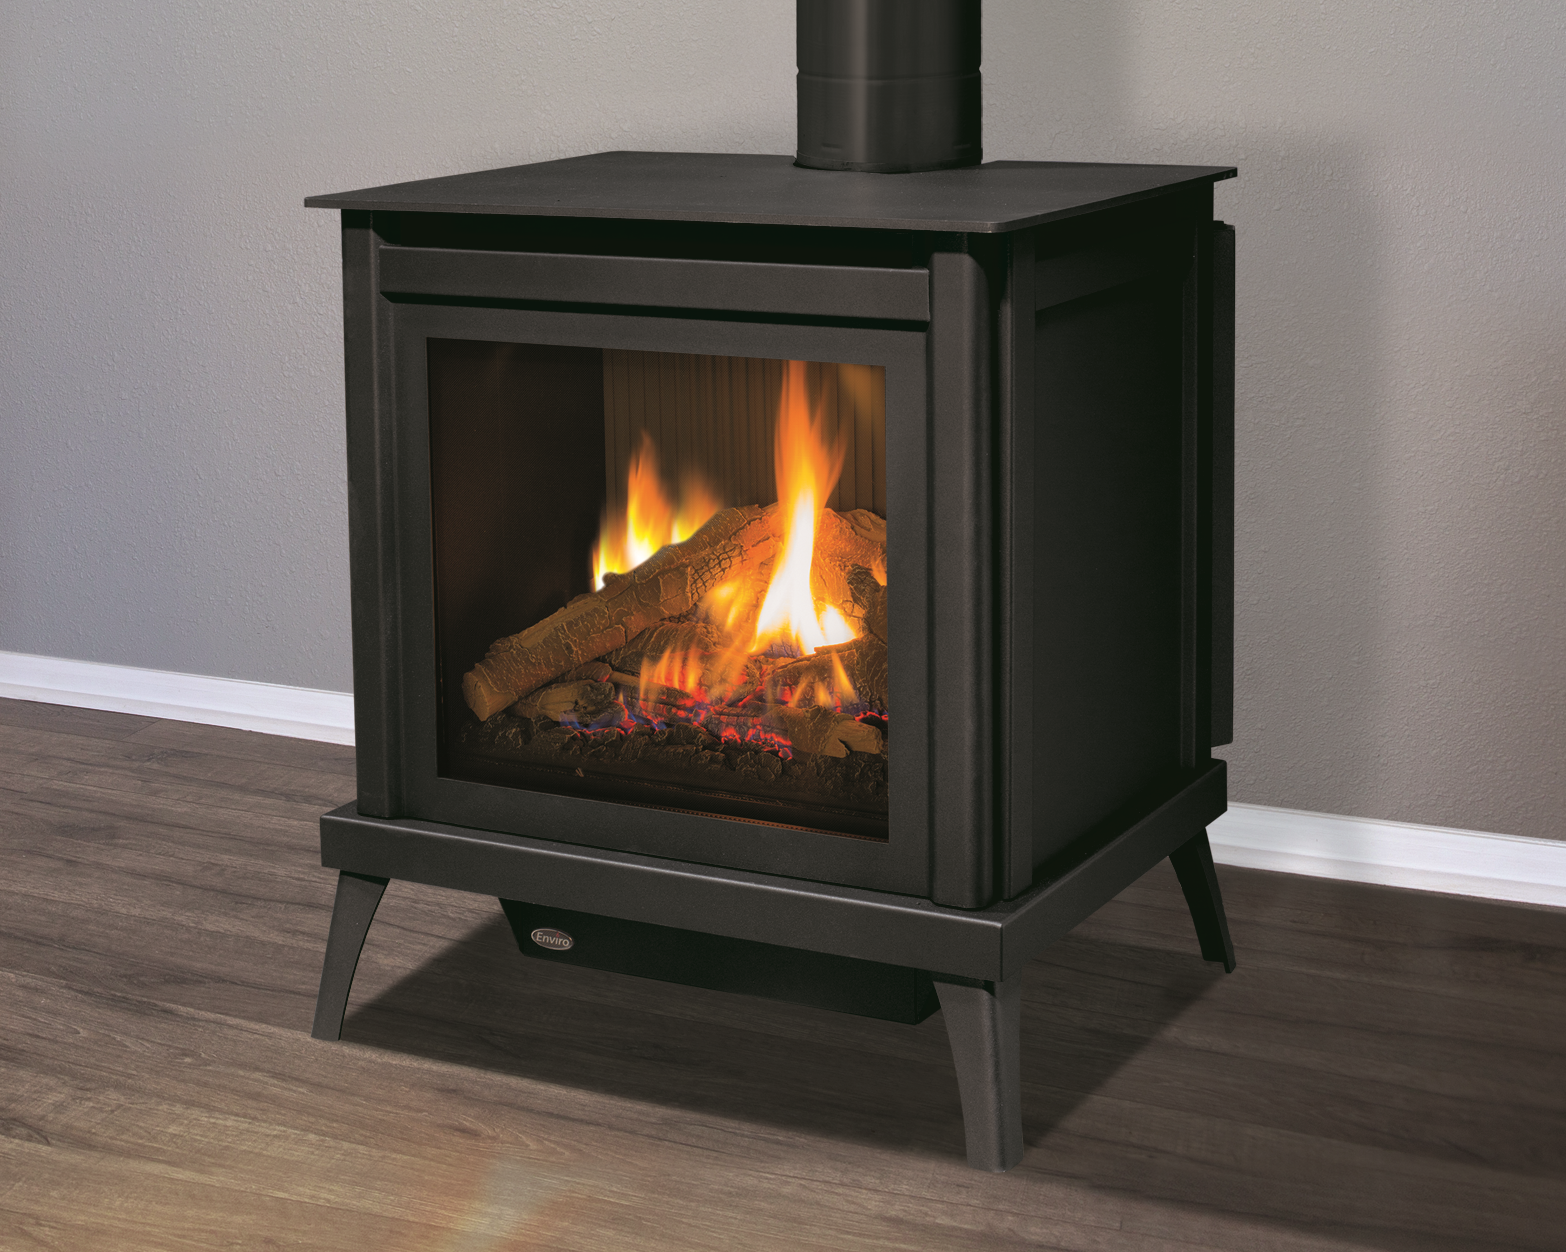 Image of the traditional steel S40 Gas Stove by Enviro that links you to the product page